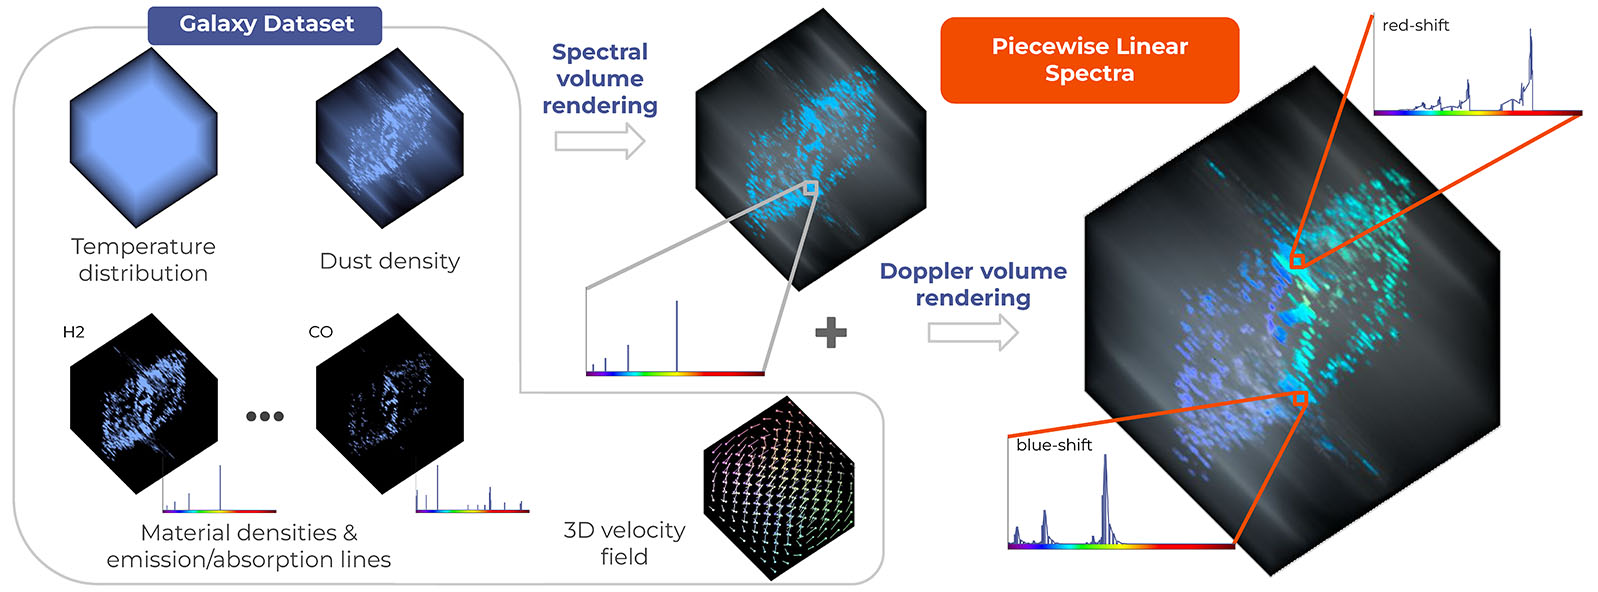 Doppler Volume Rendering: A Dynamic, Piecewise Linear Spectral Representation for Visualizing Astrophysics Simulations
